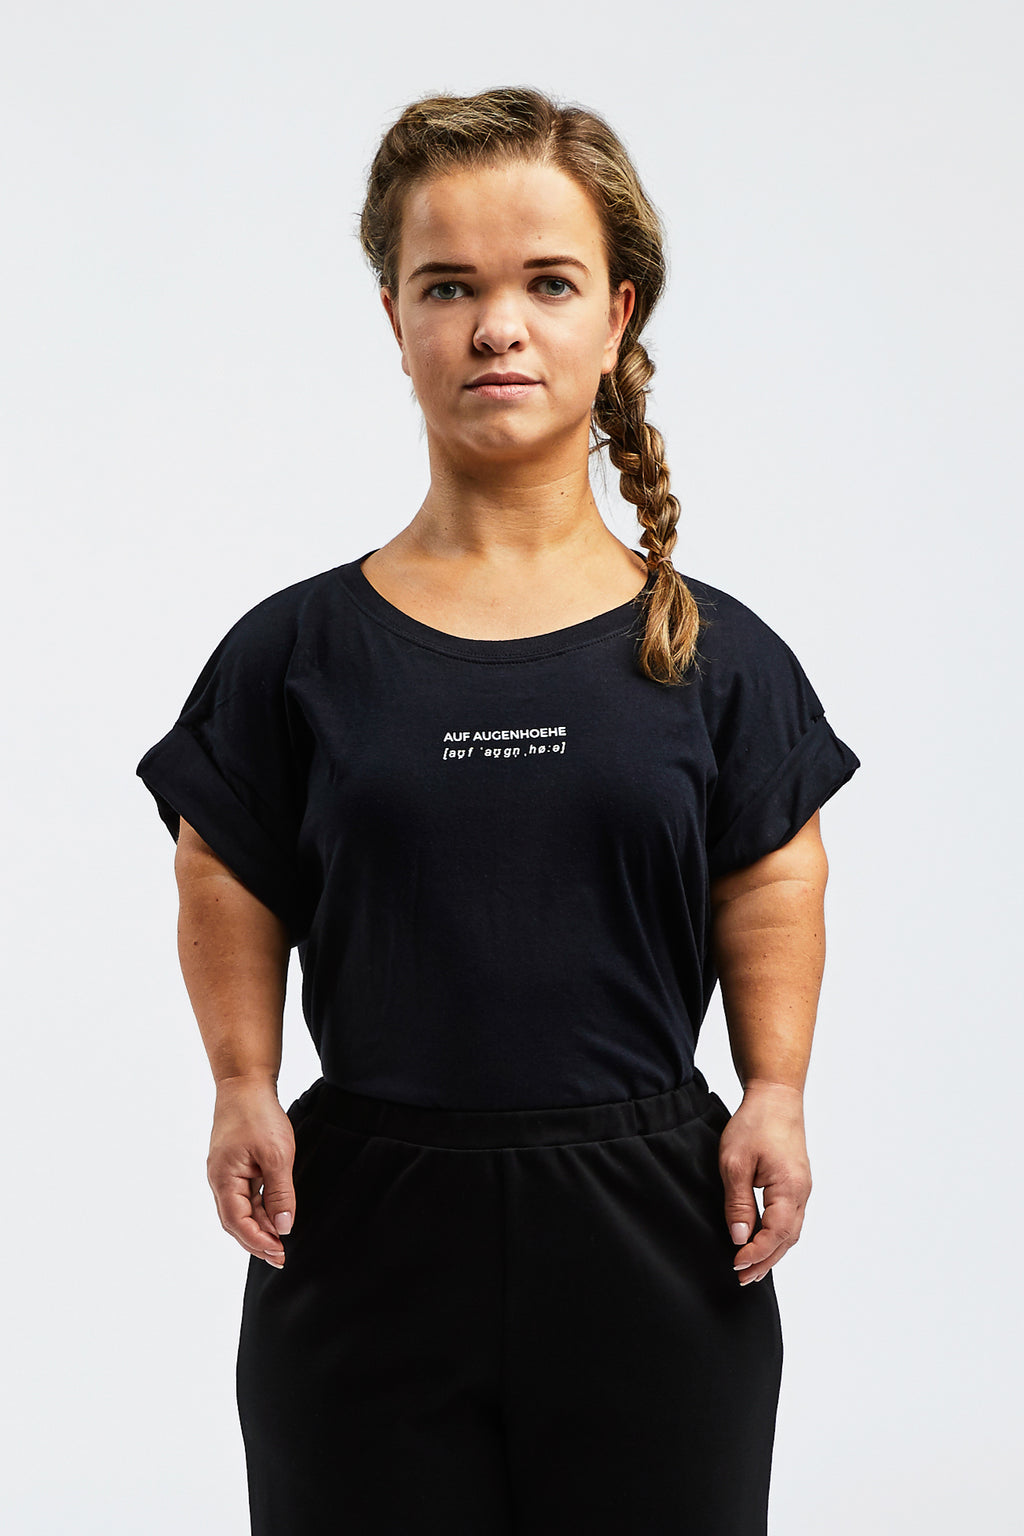 woman with dwarfism wearing a black t-shirt with small white text